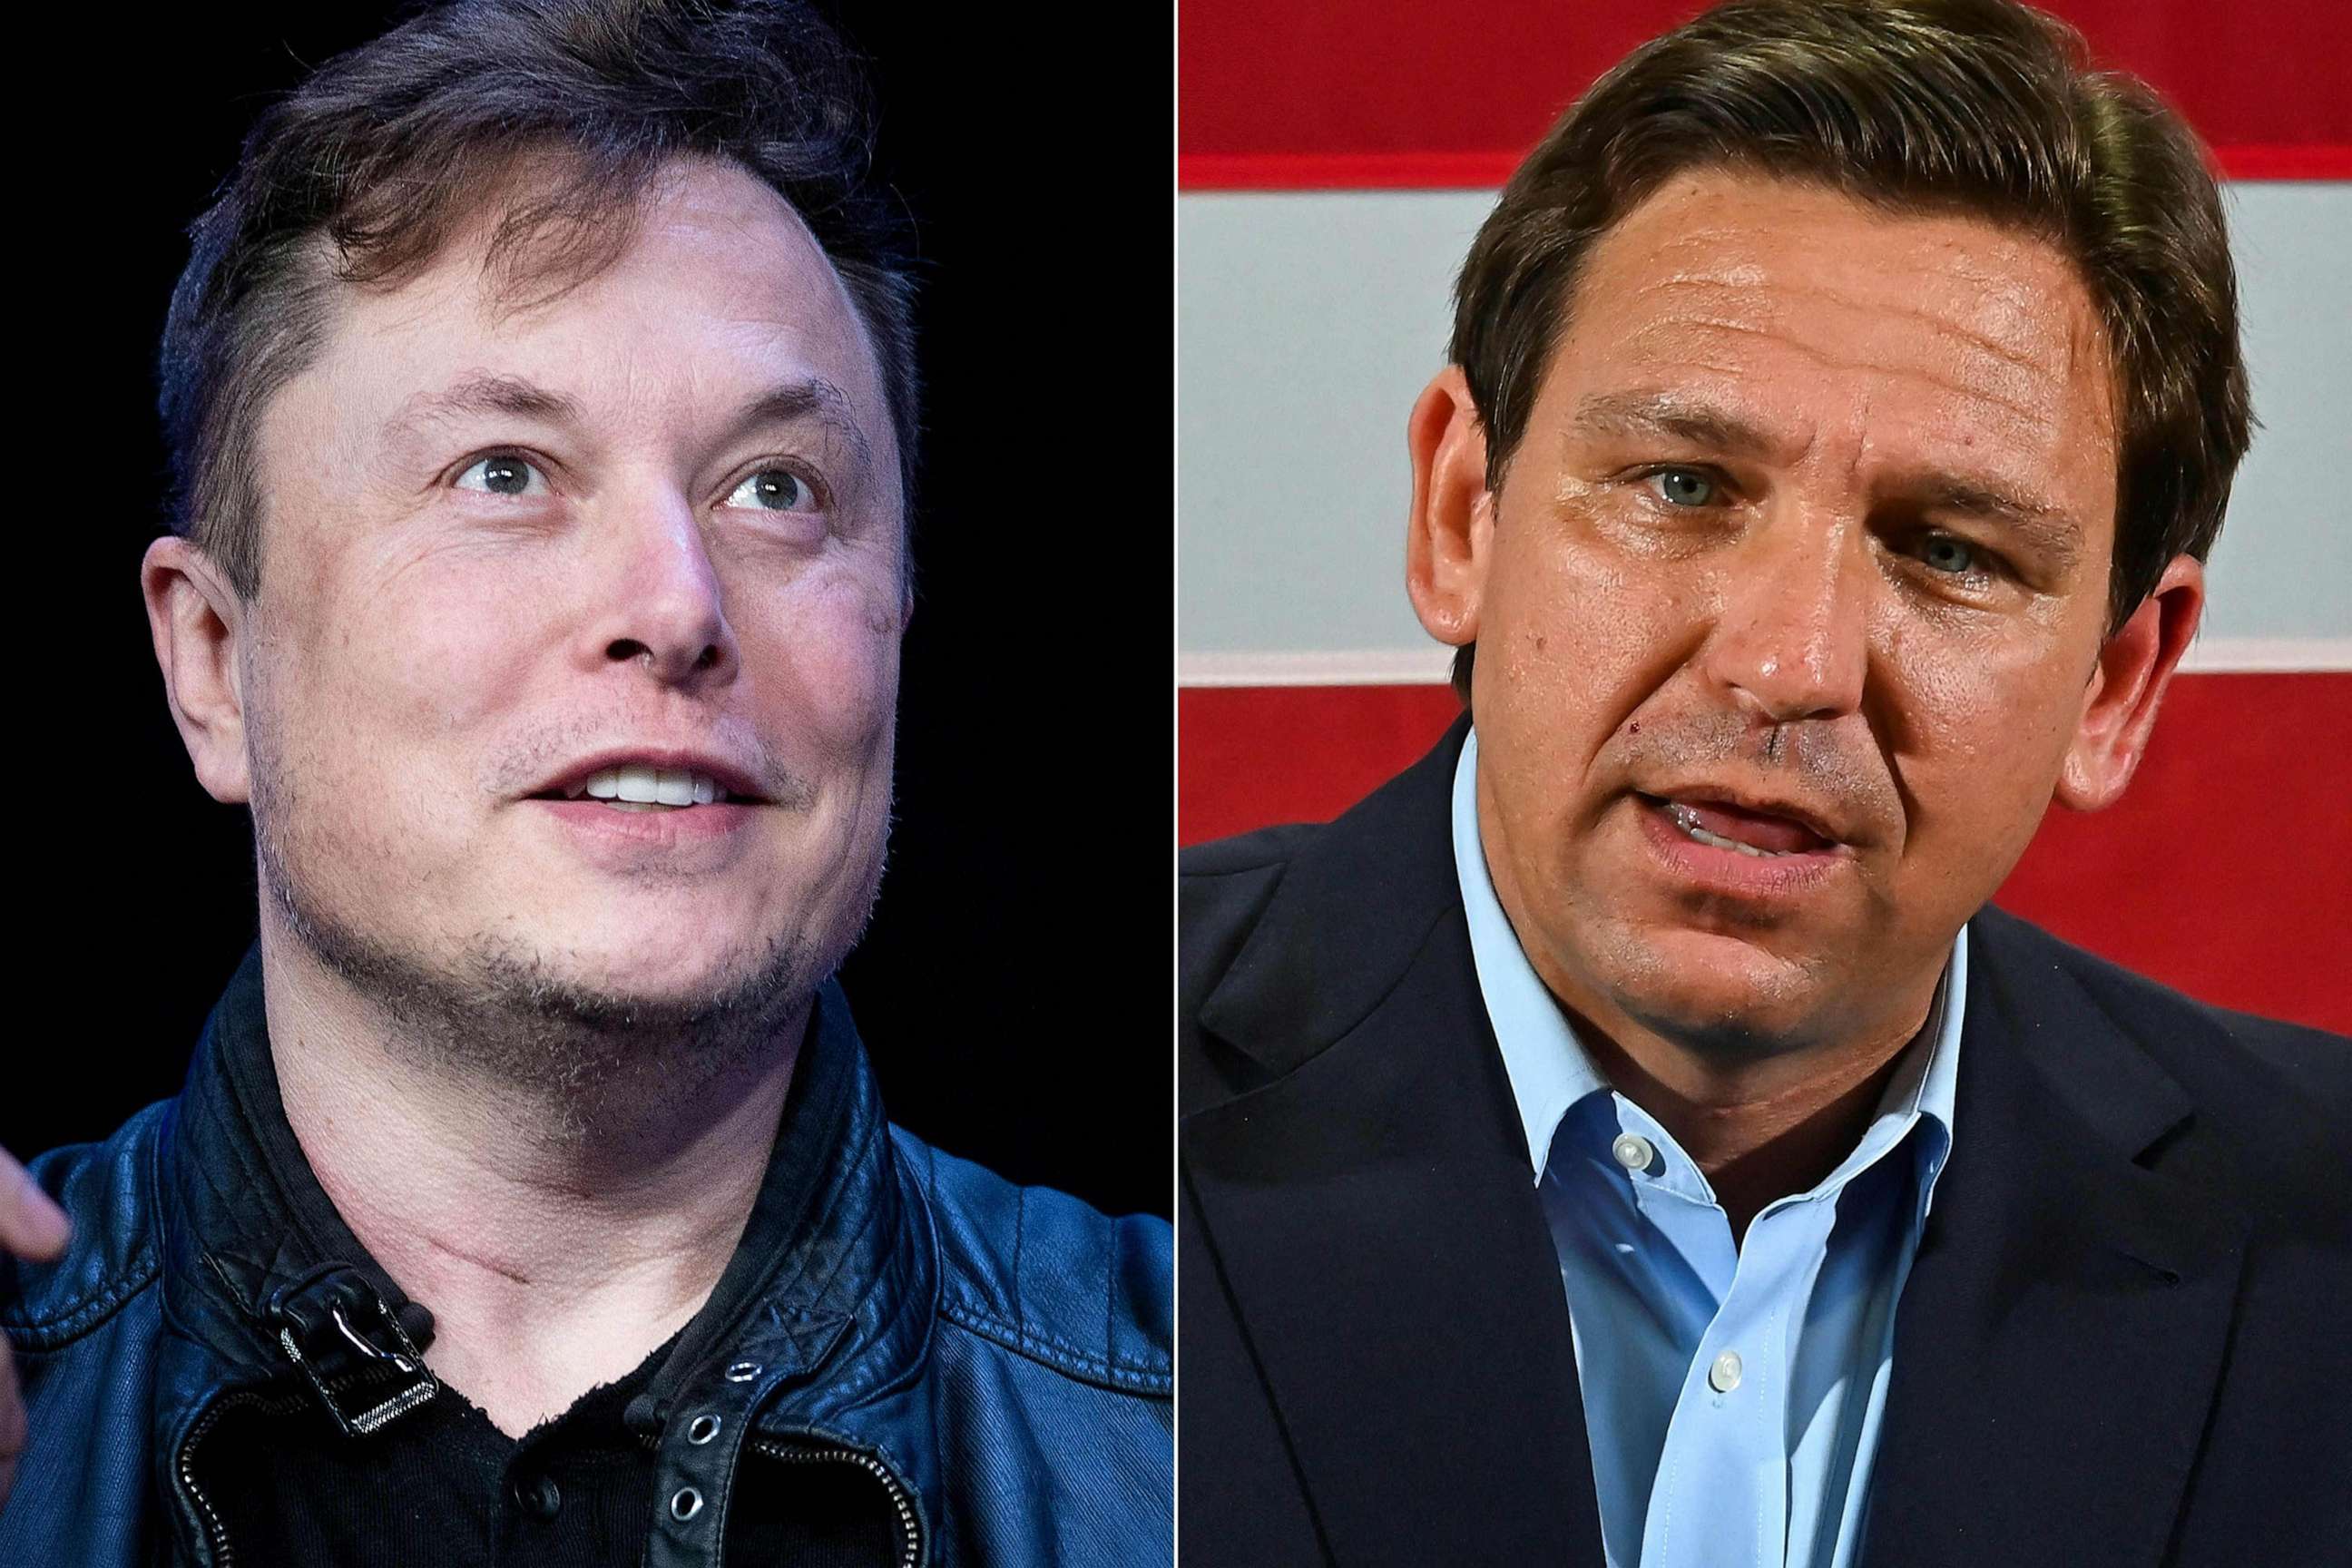 PHOTO: FILE - This combination of pictures shows Elon Musk, founder of SpaceX, at the Washington Convention Center in Washington, DC, March 9, 2020, and Florida Governor Ron DeSantis during an event in Hialeah, Florida, Nov. 7, 2022.